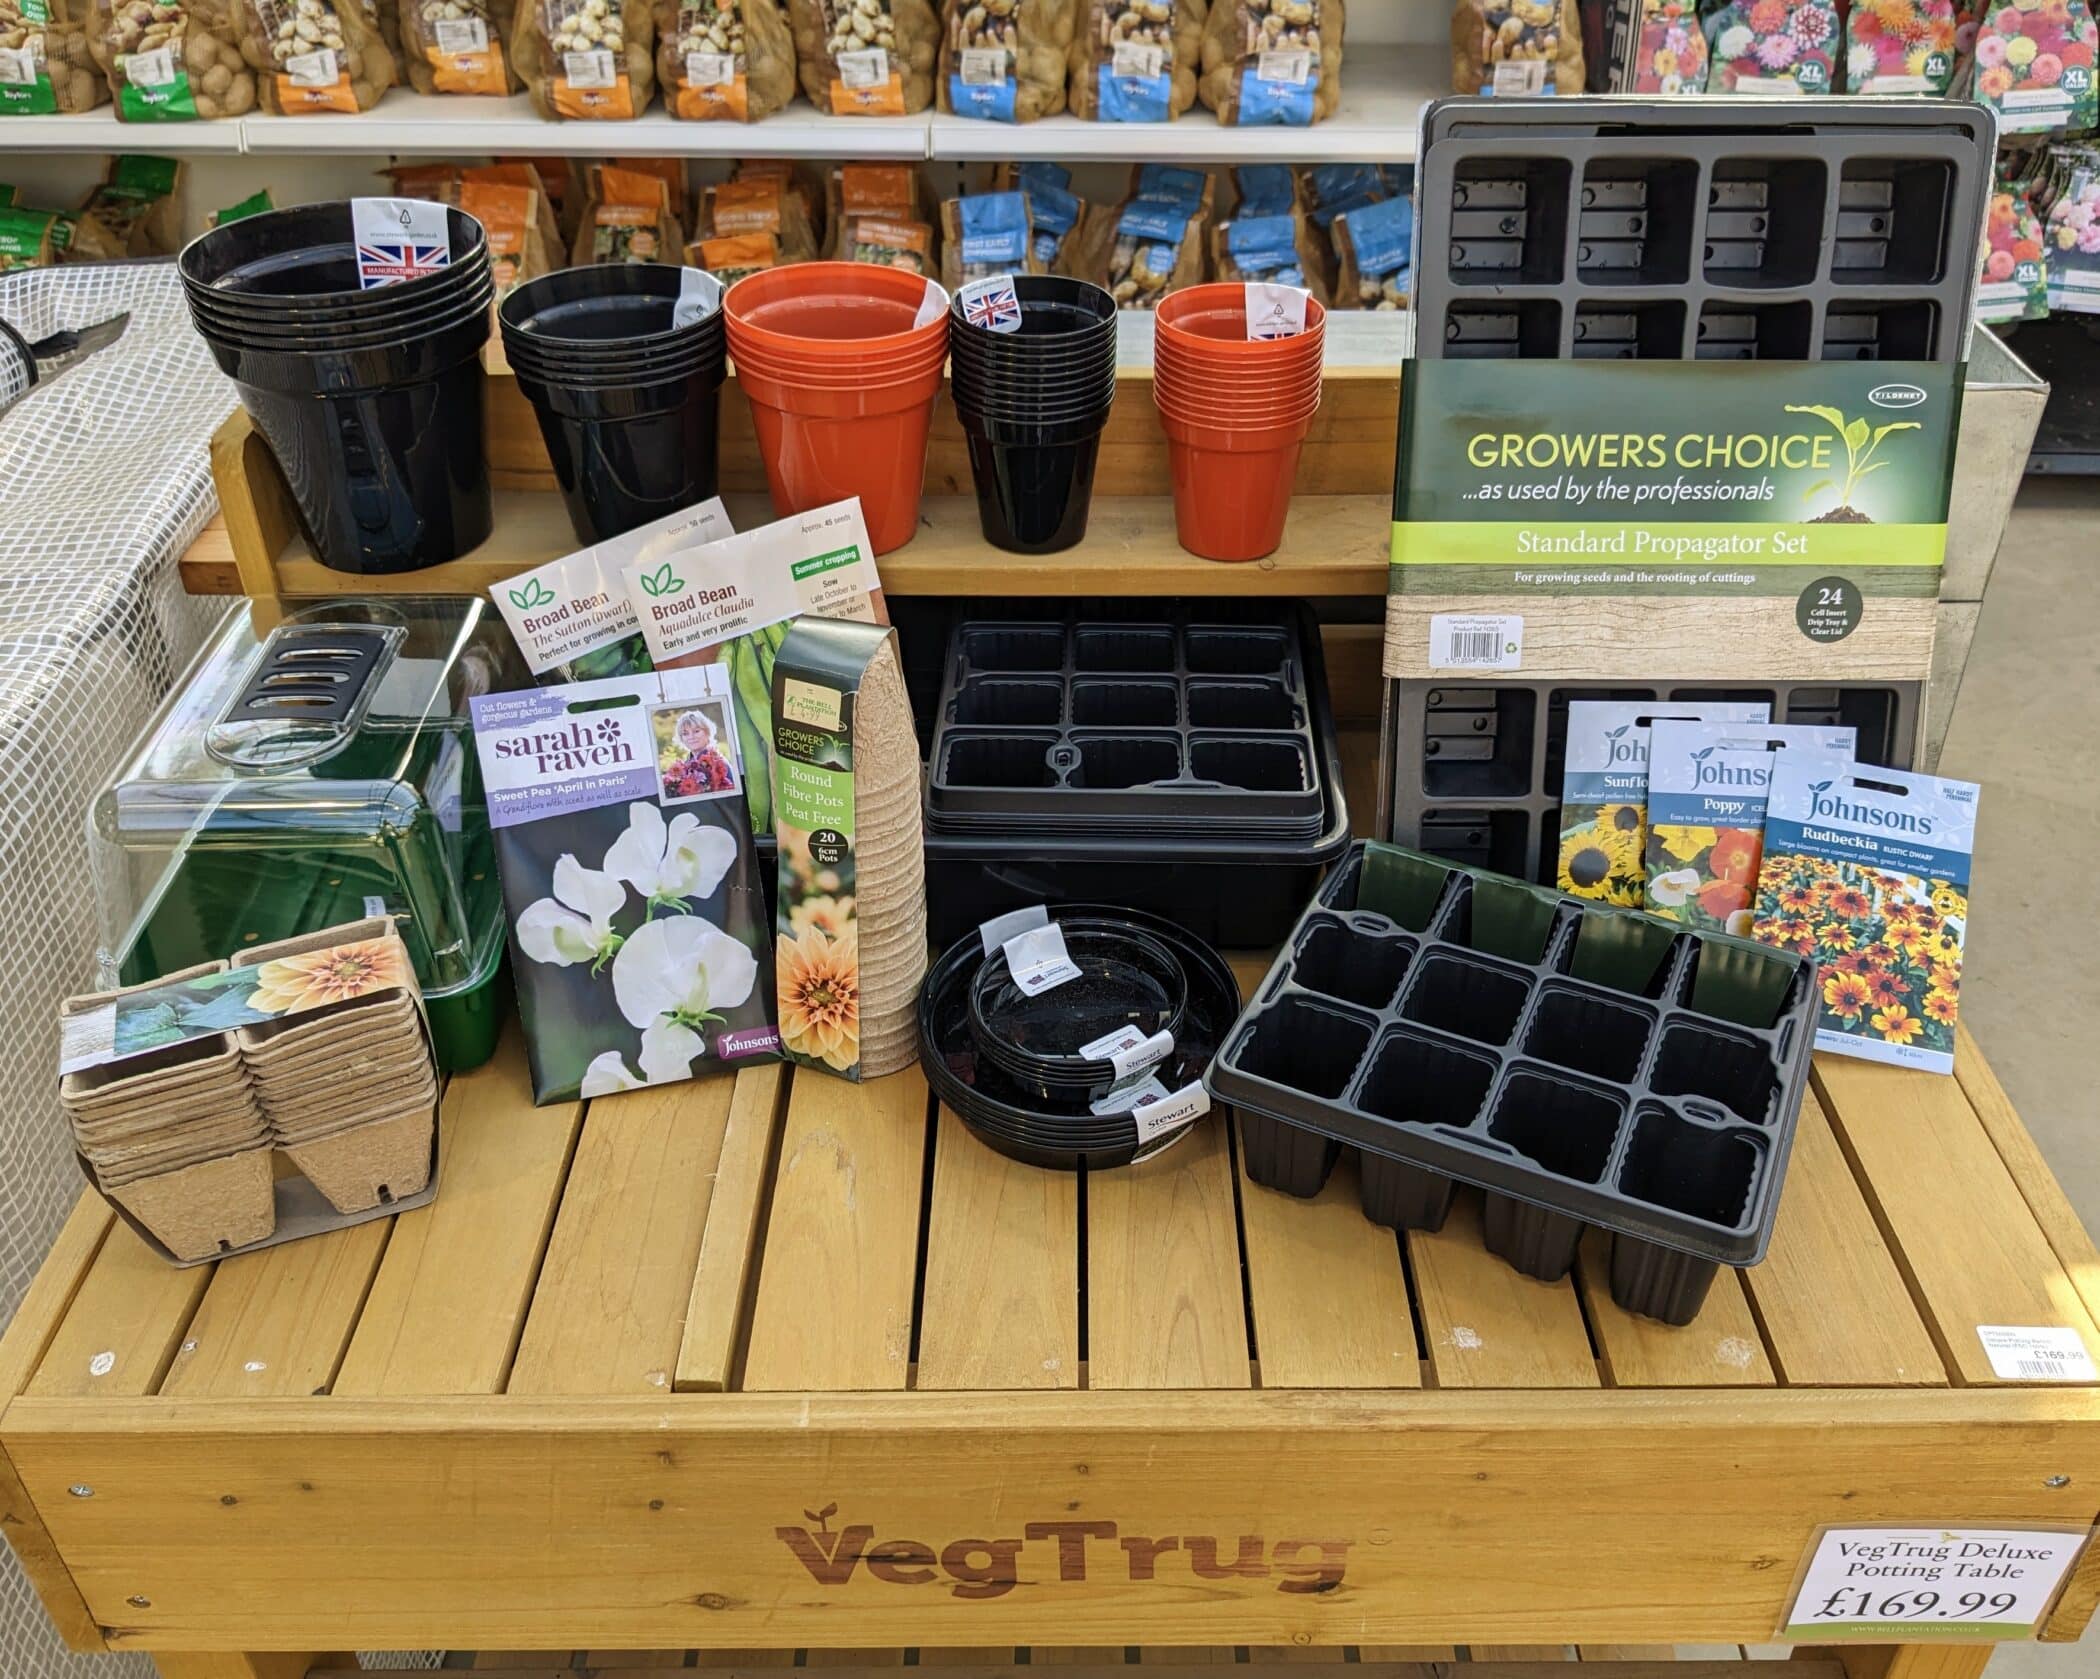 Everything you need for propagation and more!